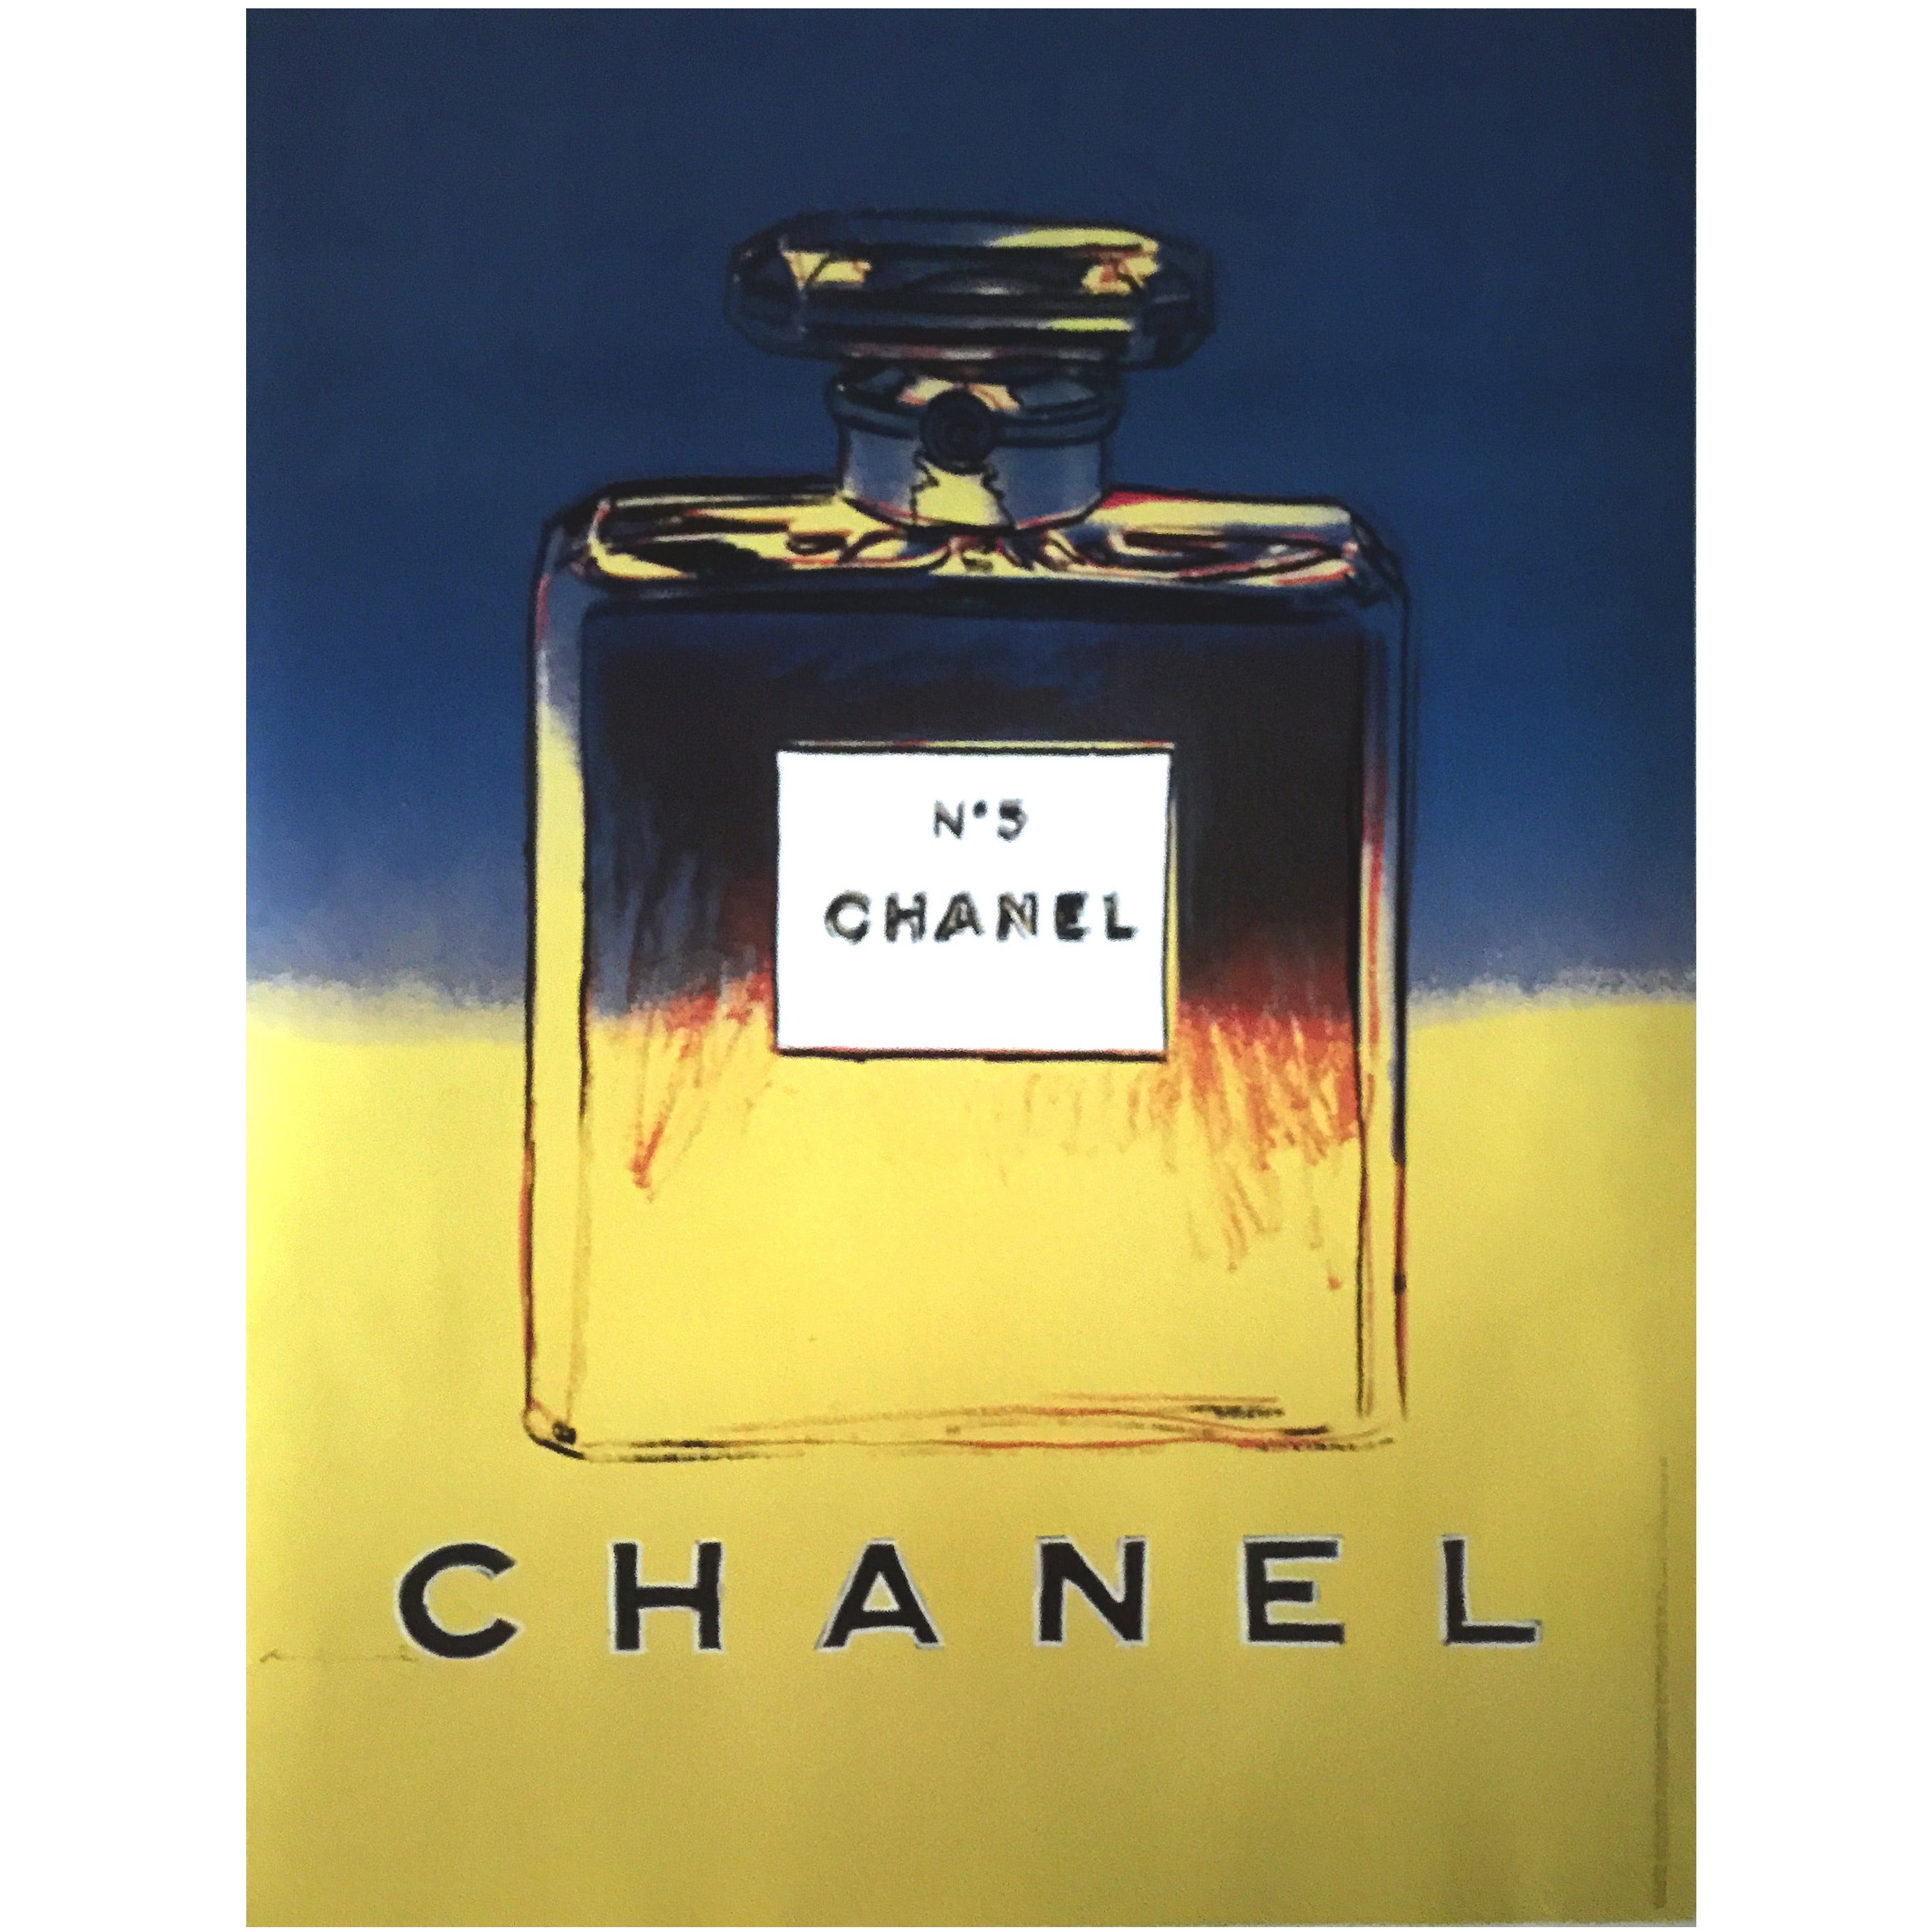 Chanel No. 5 'After Warhol', Large-Size French Poster in Blue and Yellow